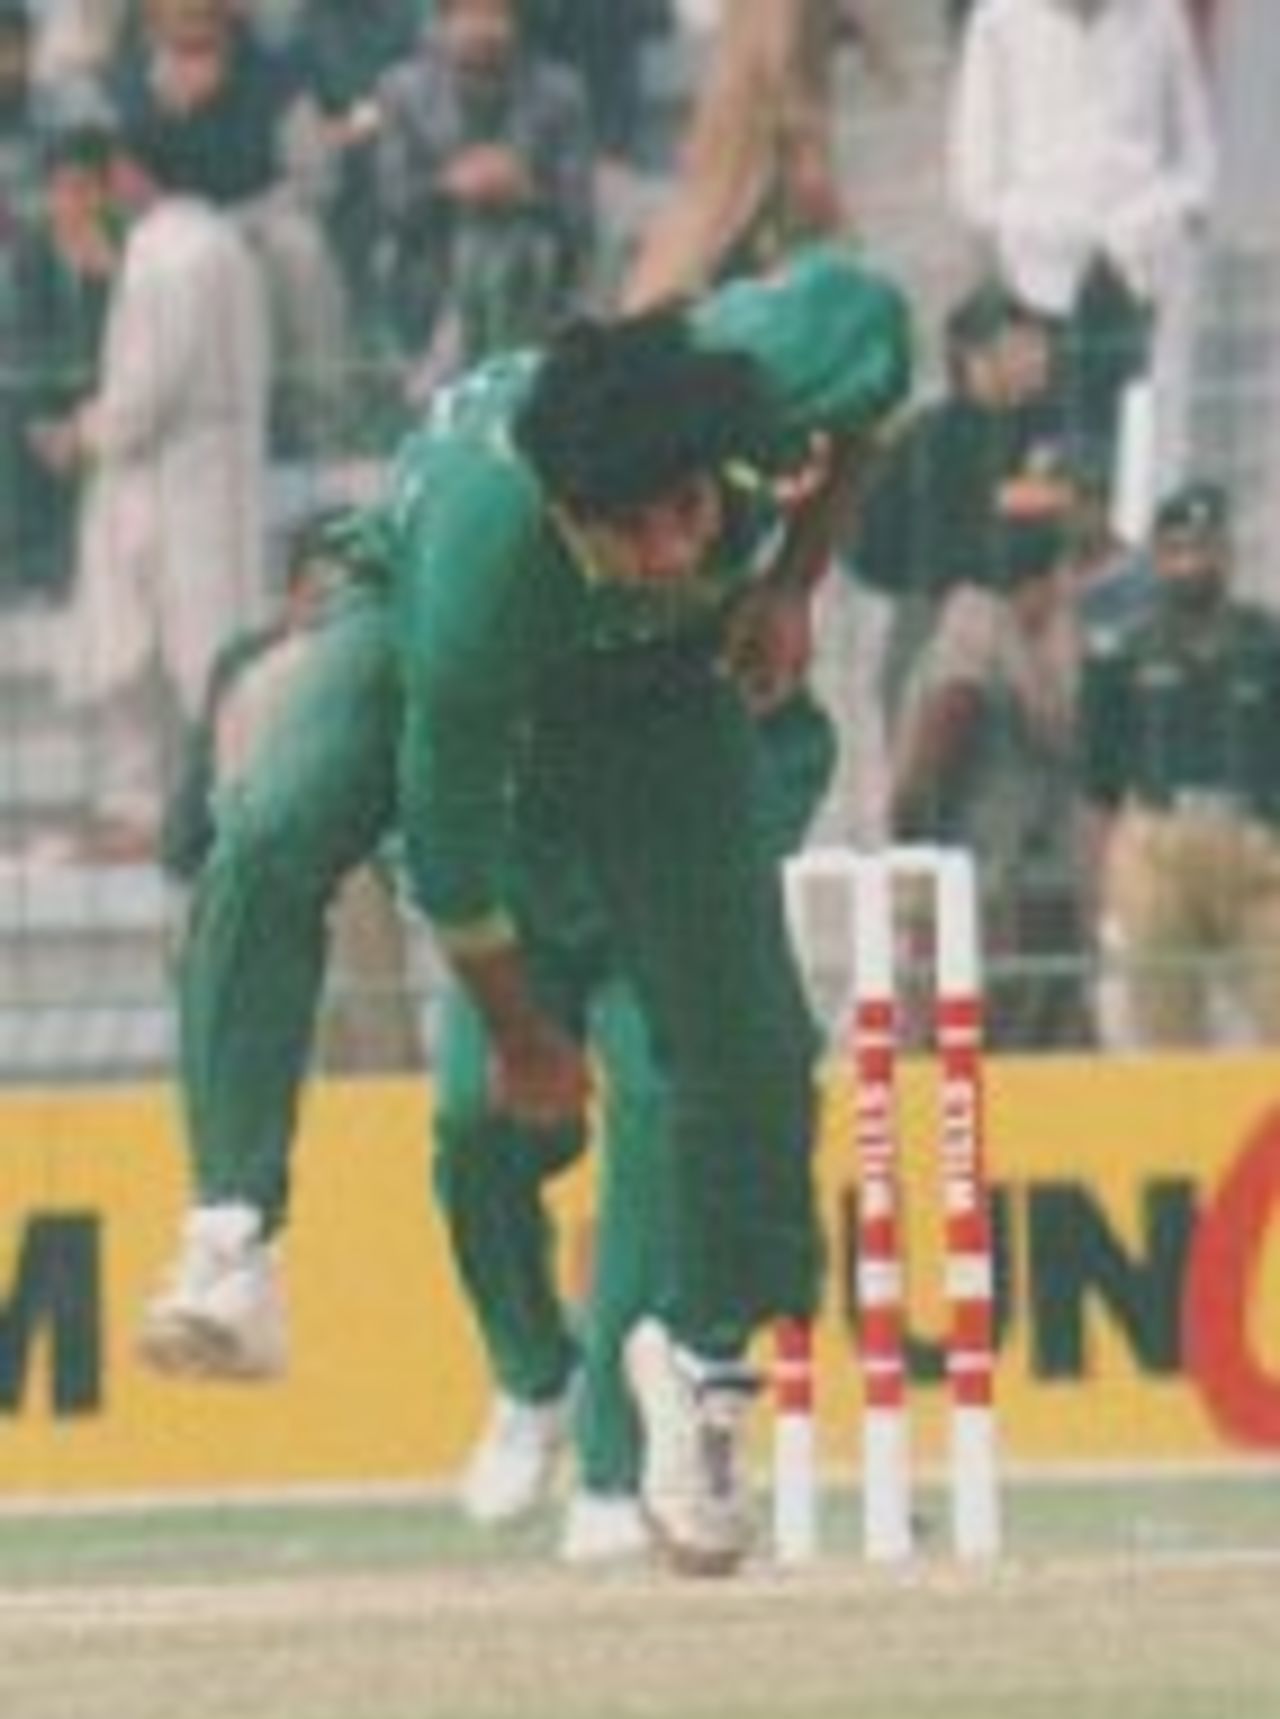 Aaqib's complete follow through, World Cup 1996